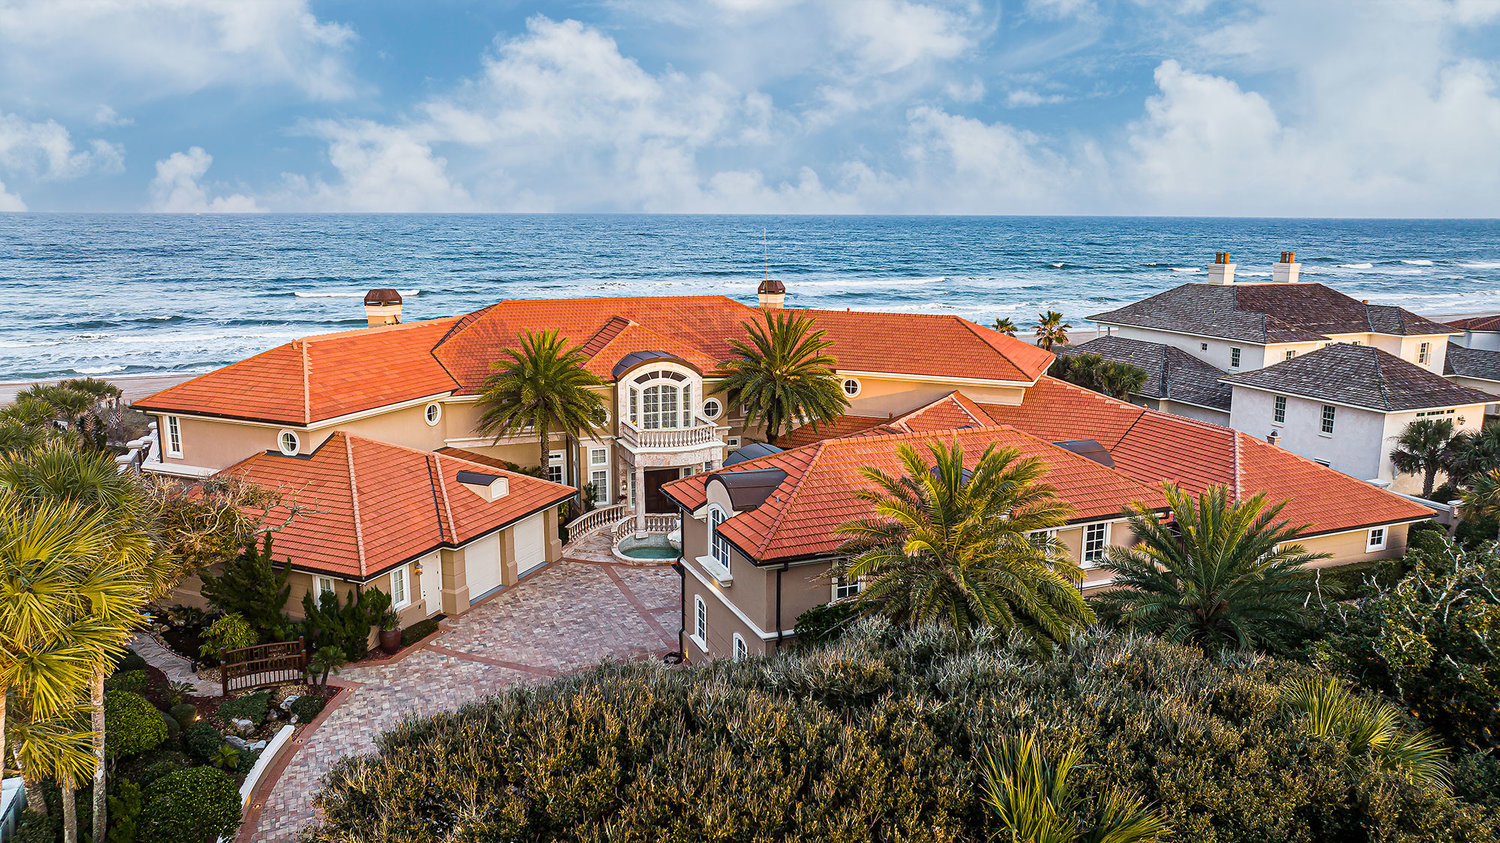 Douglas Elliman’s influence on the local luxury real estate market has already taken hold. This oceanfront estate is currently on the market for $16.9 million.